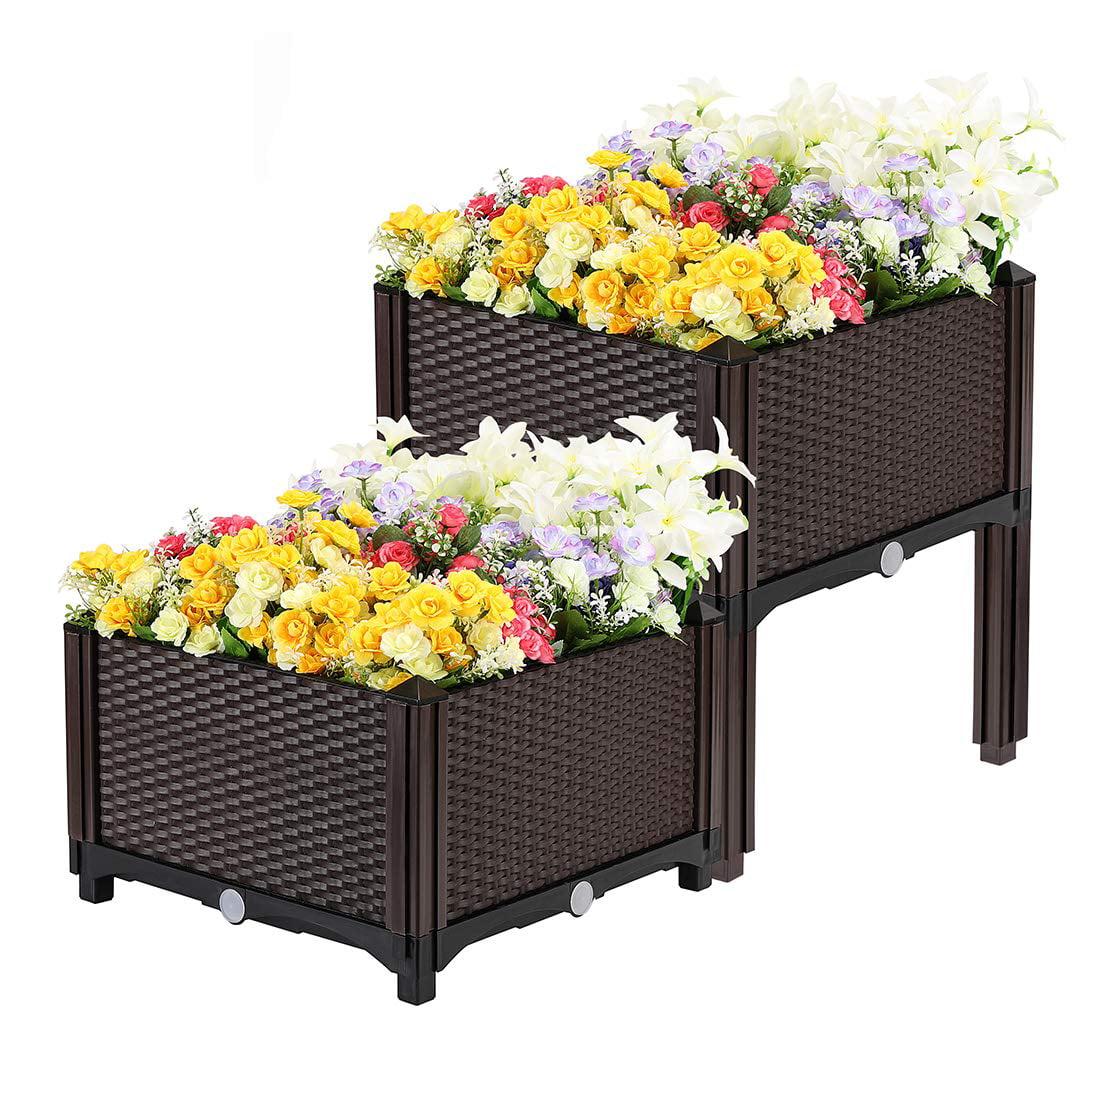 Brown SSLine Set of 2 Raised Garden Bed Kits,Elevated Planter Box for Vegetables Fruits Herb Grow,Outdoor Plastic Elevated Garden beds with Self-Watering,Indoor Planting Box Container for Patio 